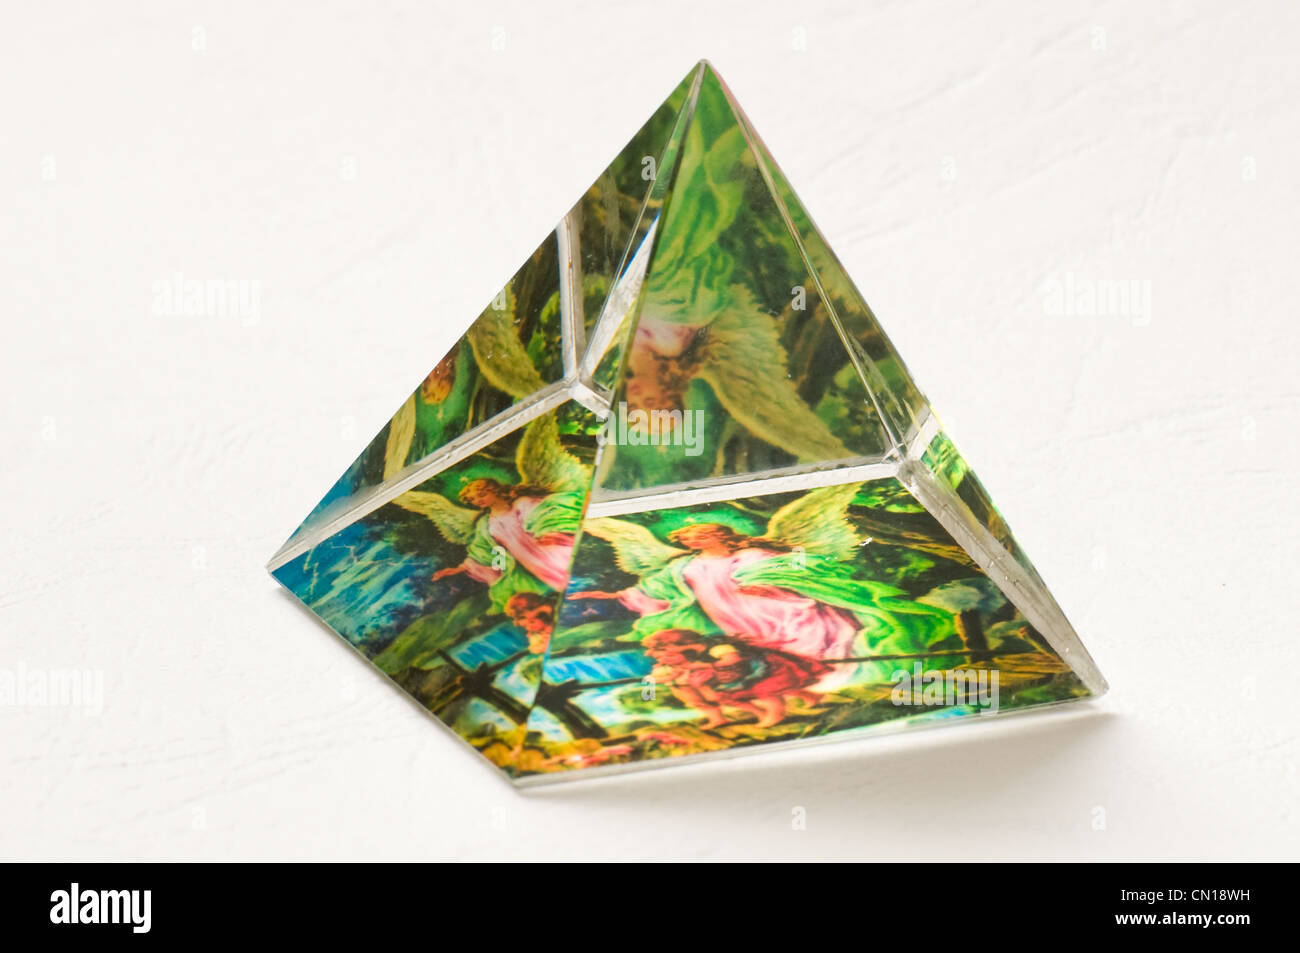 angel image in glass pyramind prism Stock Photo